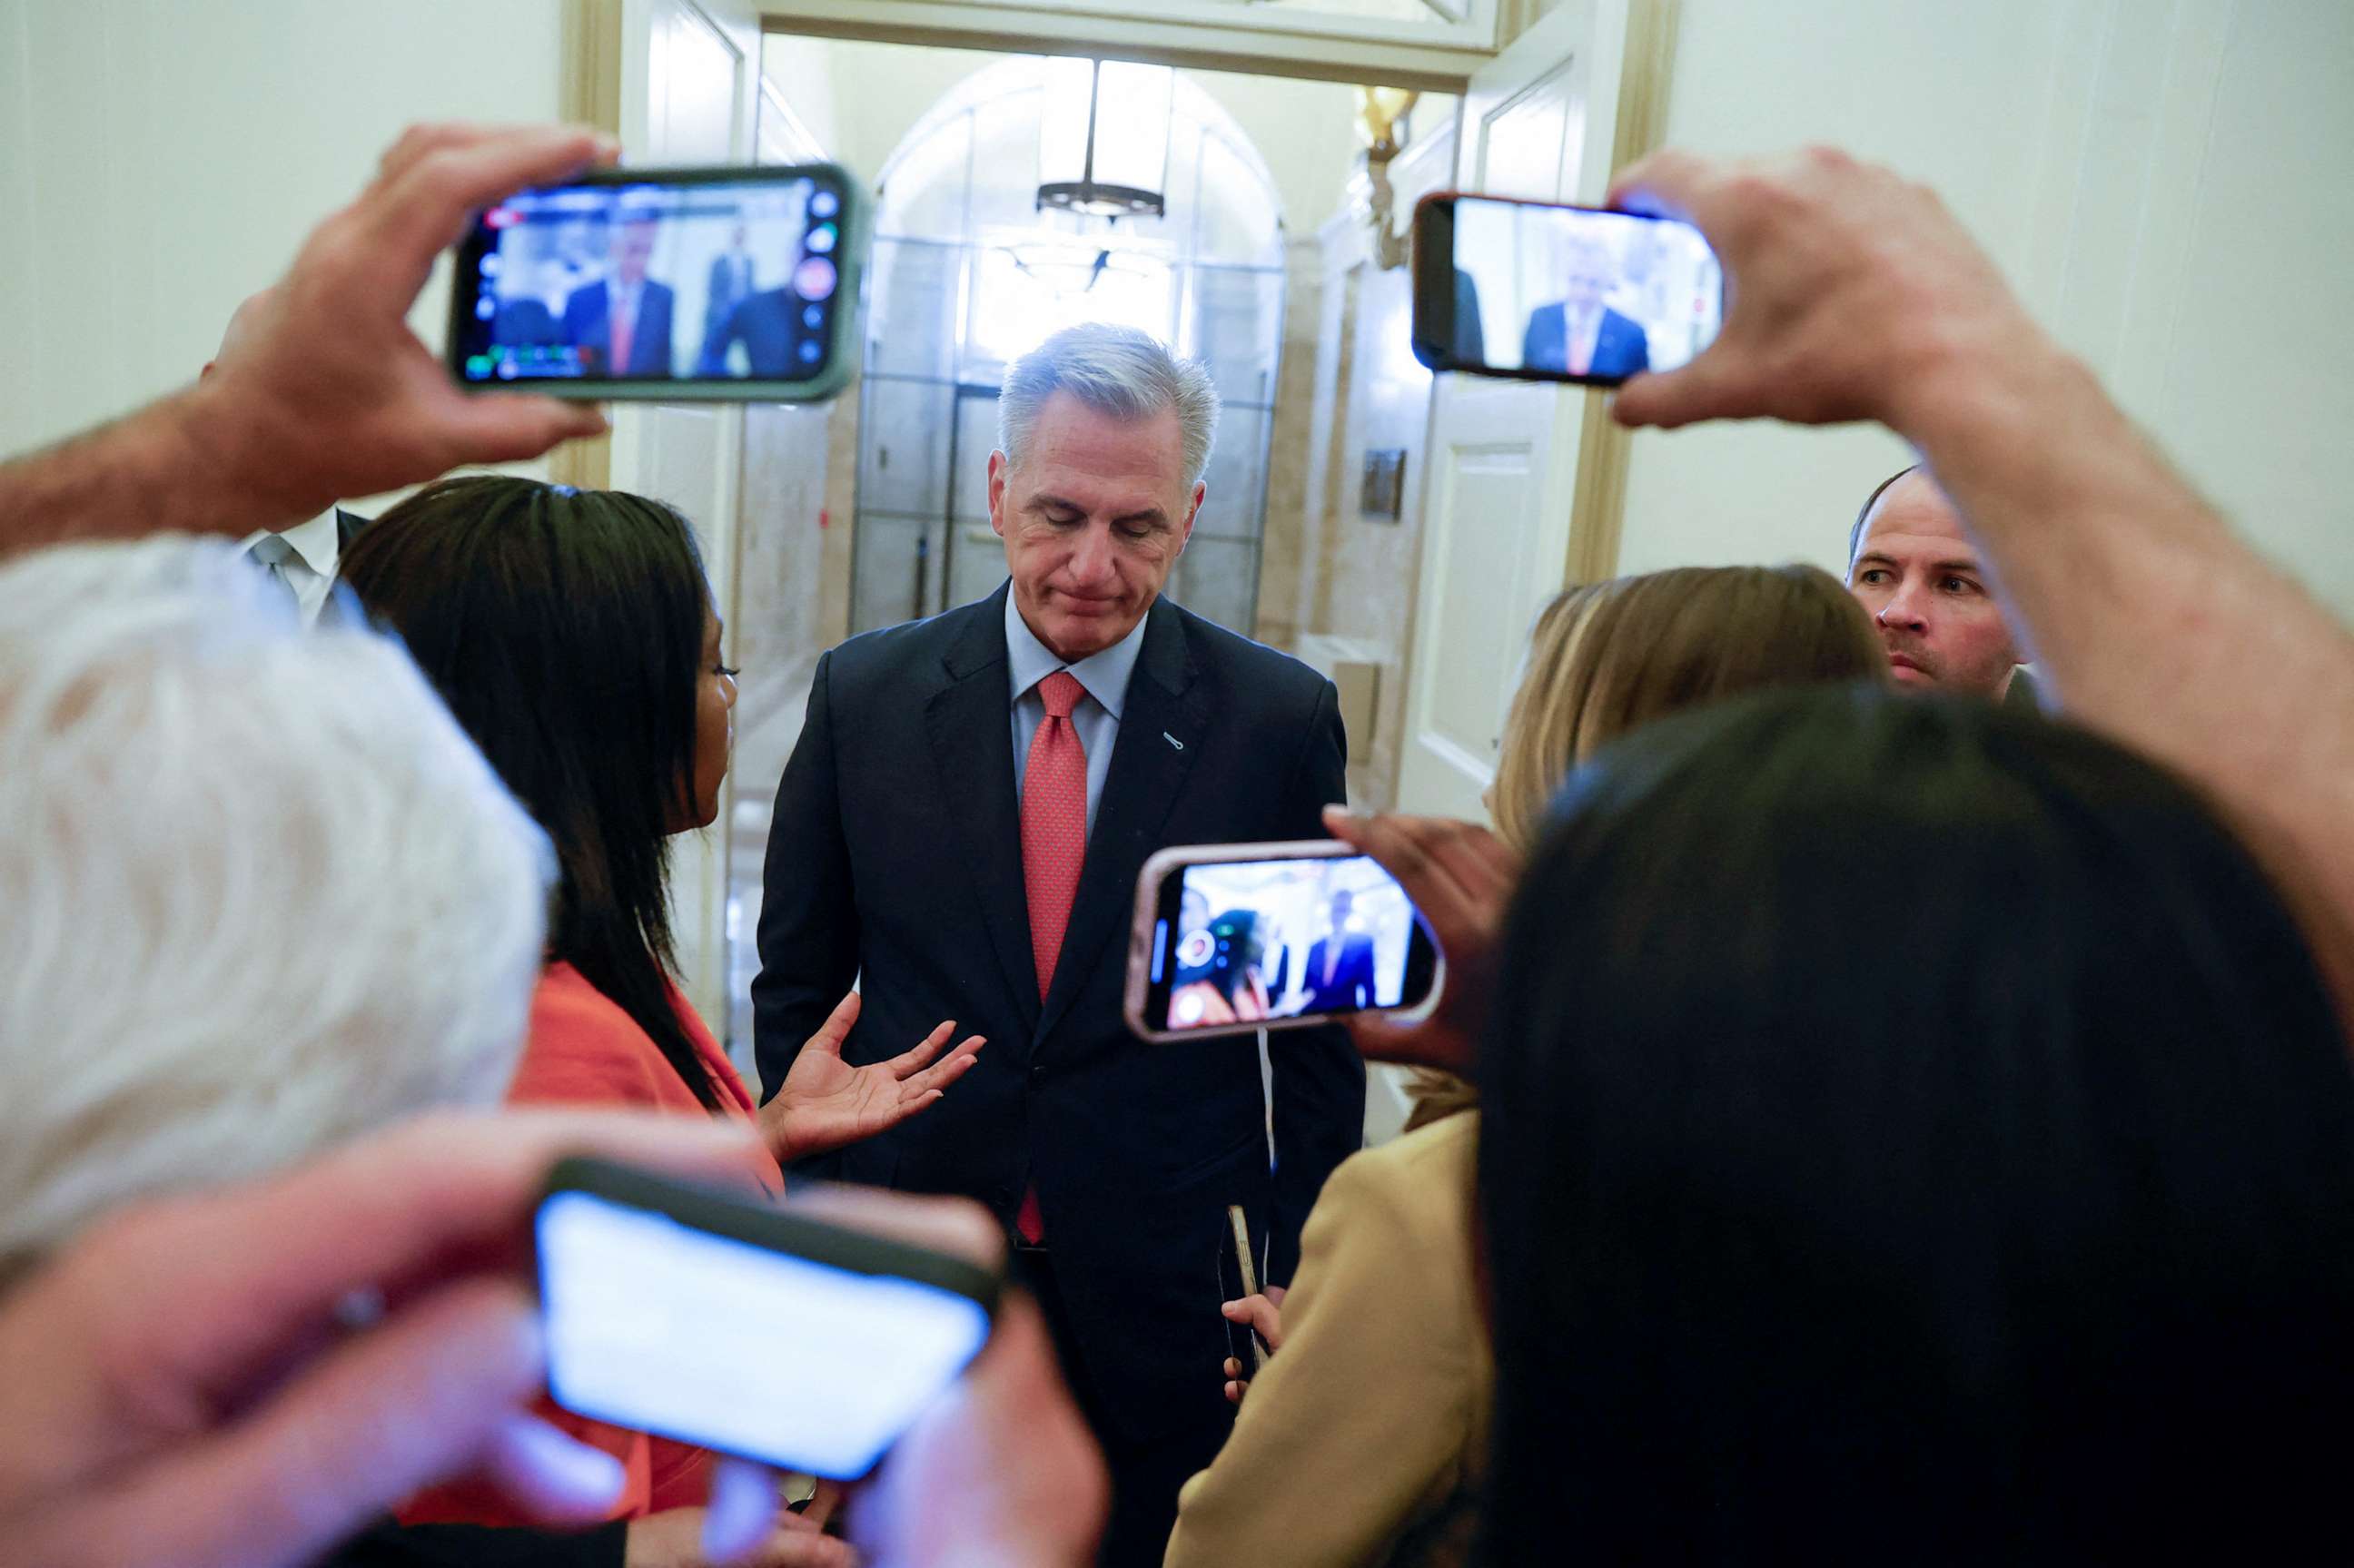 PHOTO: House Speaker Kevin McCarthy speaks with reporters as he arrives for the day in the midst of ongoing negotiations seeking a deal to raise the United States' debt ceiling, at the U.S. Capitol in Washington, D.C., May 24, 2023.